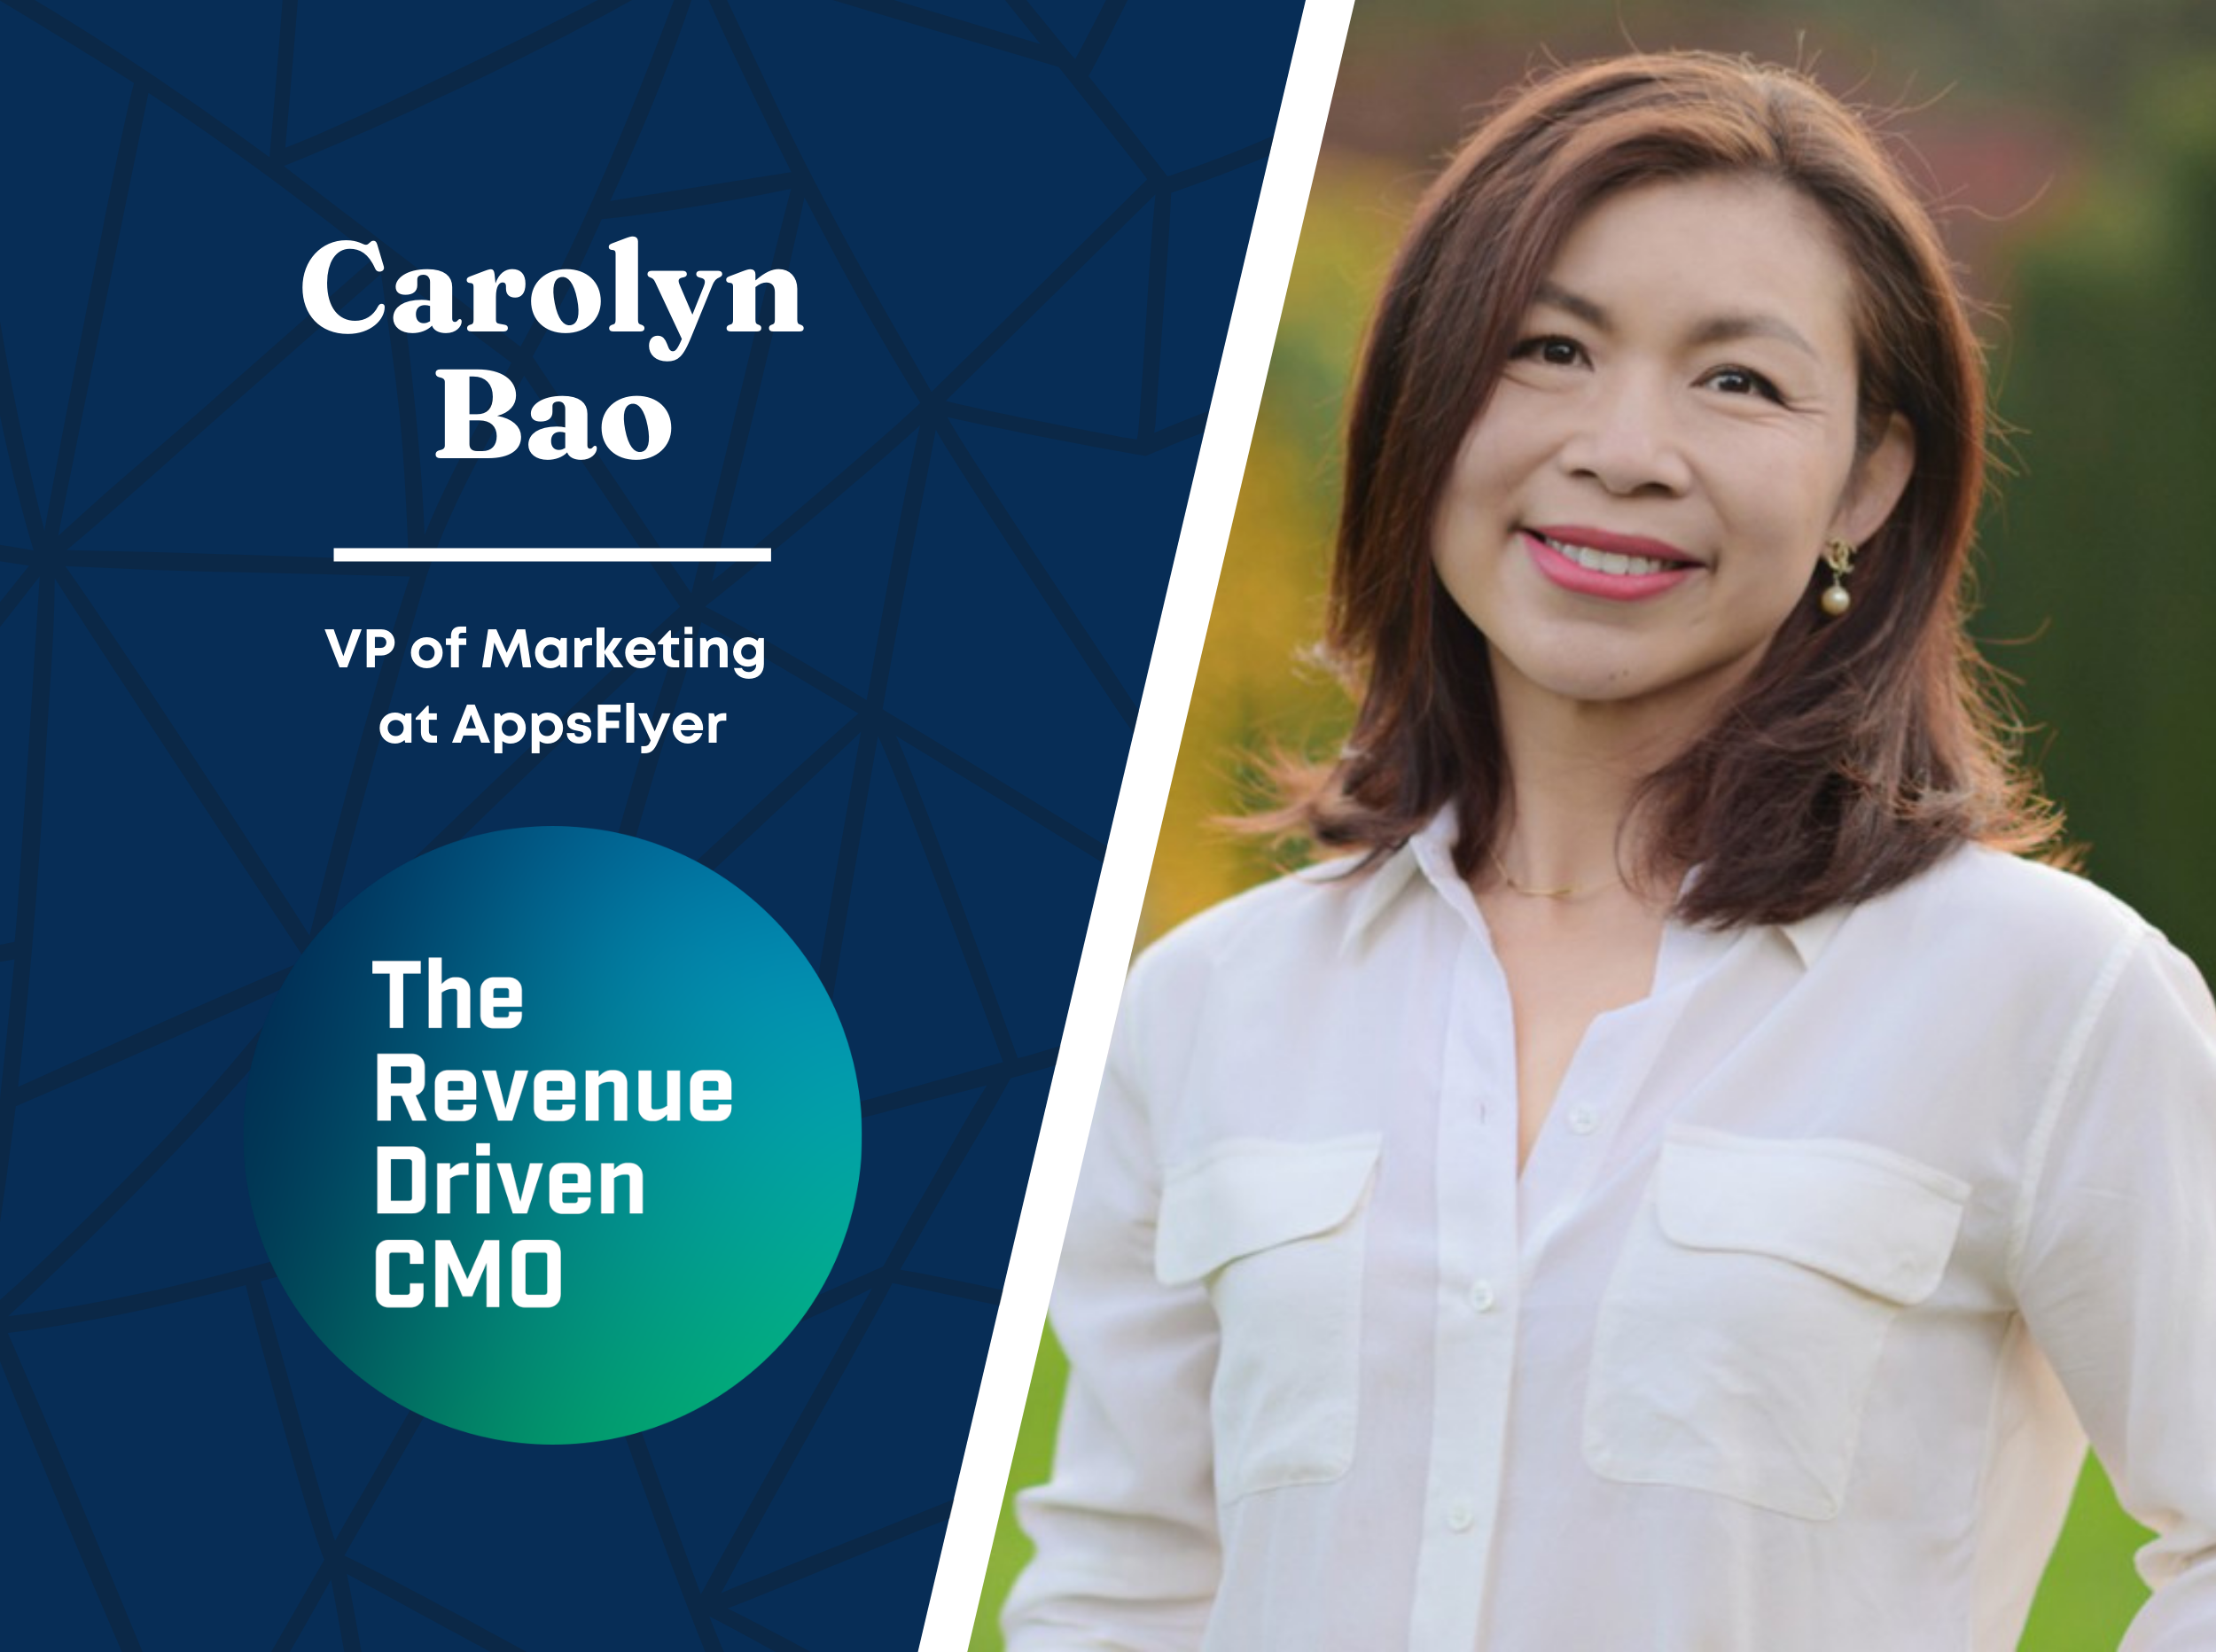 The Key to Fostering Your Own Curiosity with Carolyn Bao